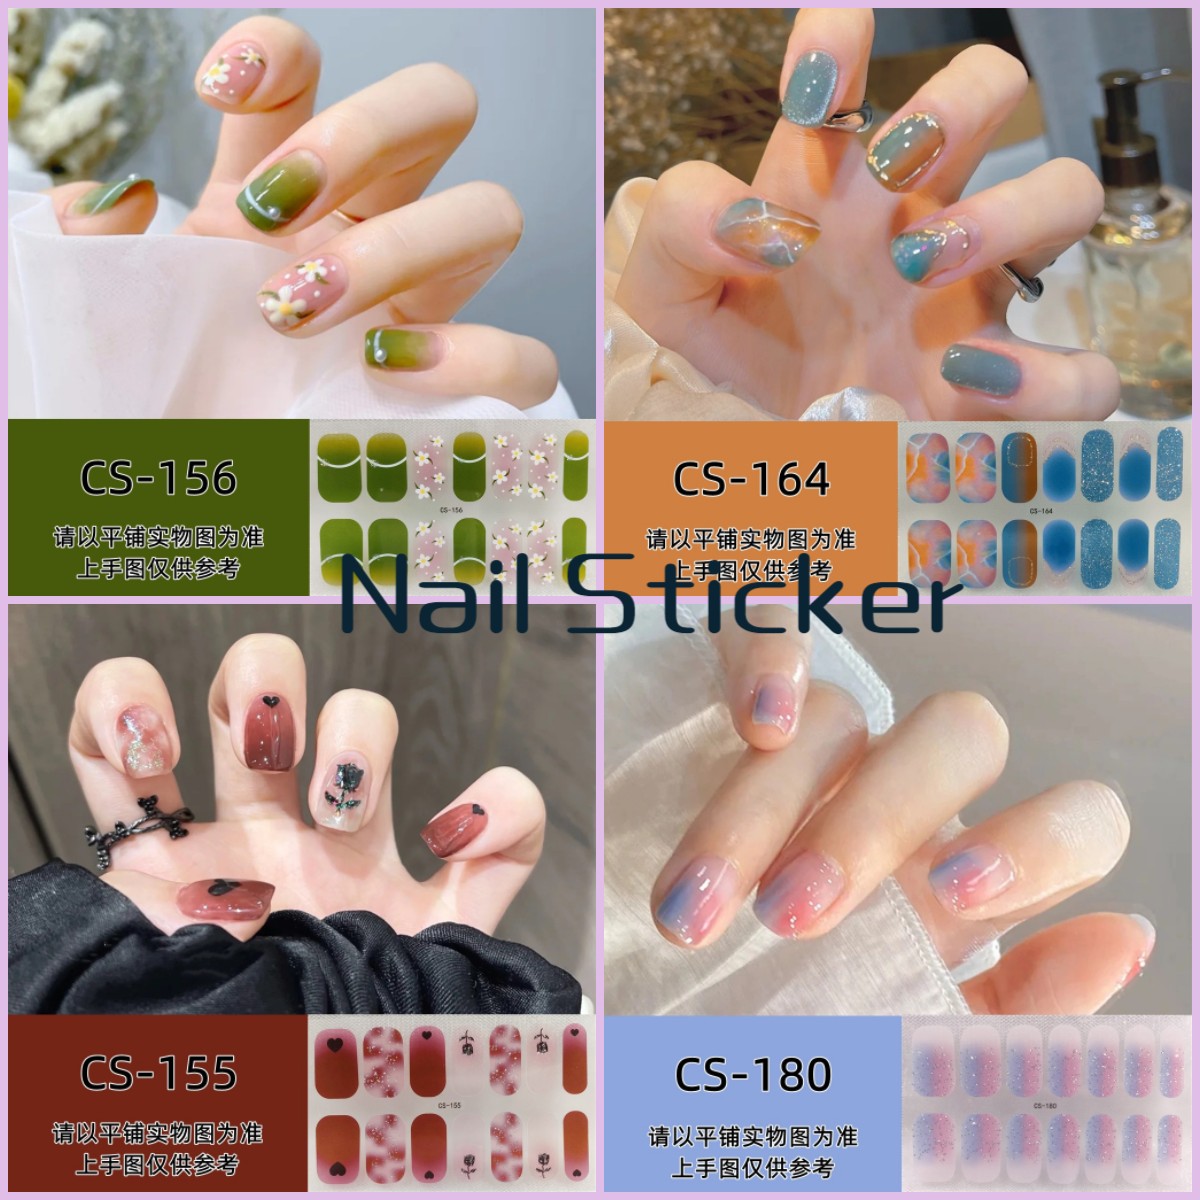 14pcs/set CS Series Cute Nail Sticker Cartoon Gold foil Fashion Exquisite Tearable and Durable DIY Beautiful Girl Fingernail Stickers Full Set Colorful lovely  Gradient Waterproof Non-Toxic Nail Art Manicure